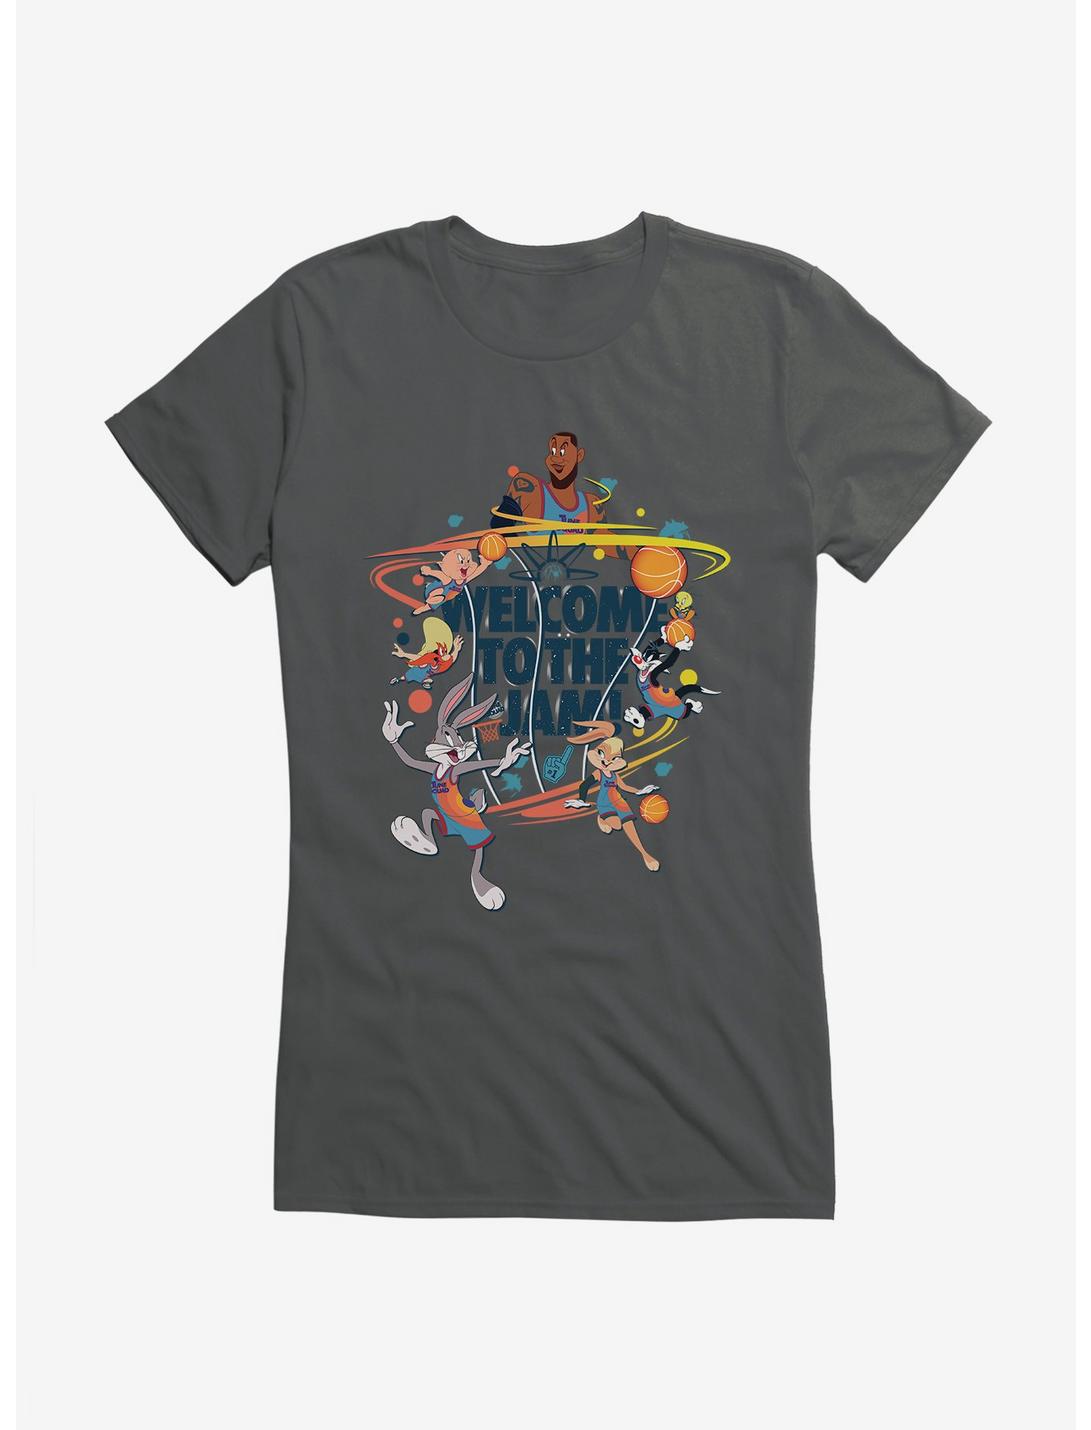 Space Jam: A New Legacy LeBron And Tune Squad Welcome To The Jam! Girls T-Shirt, CHARCOAL, hi-res